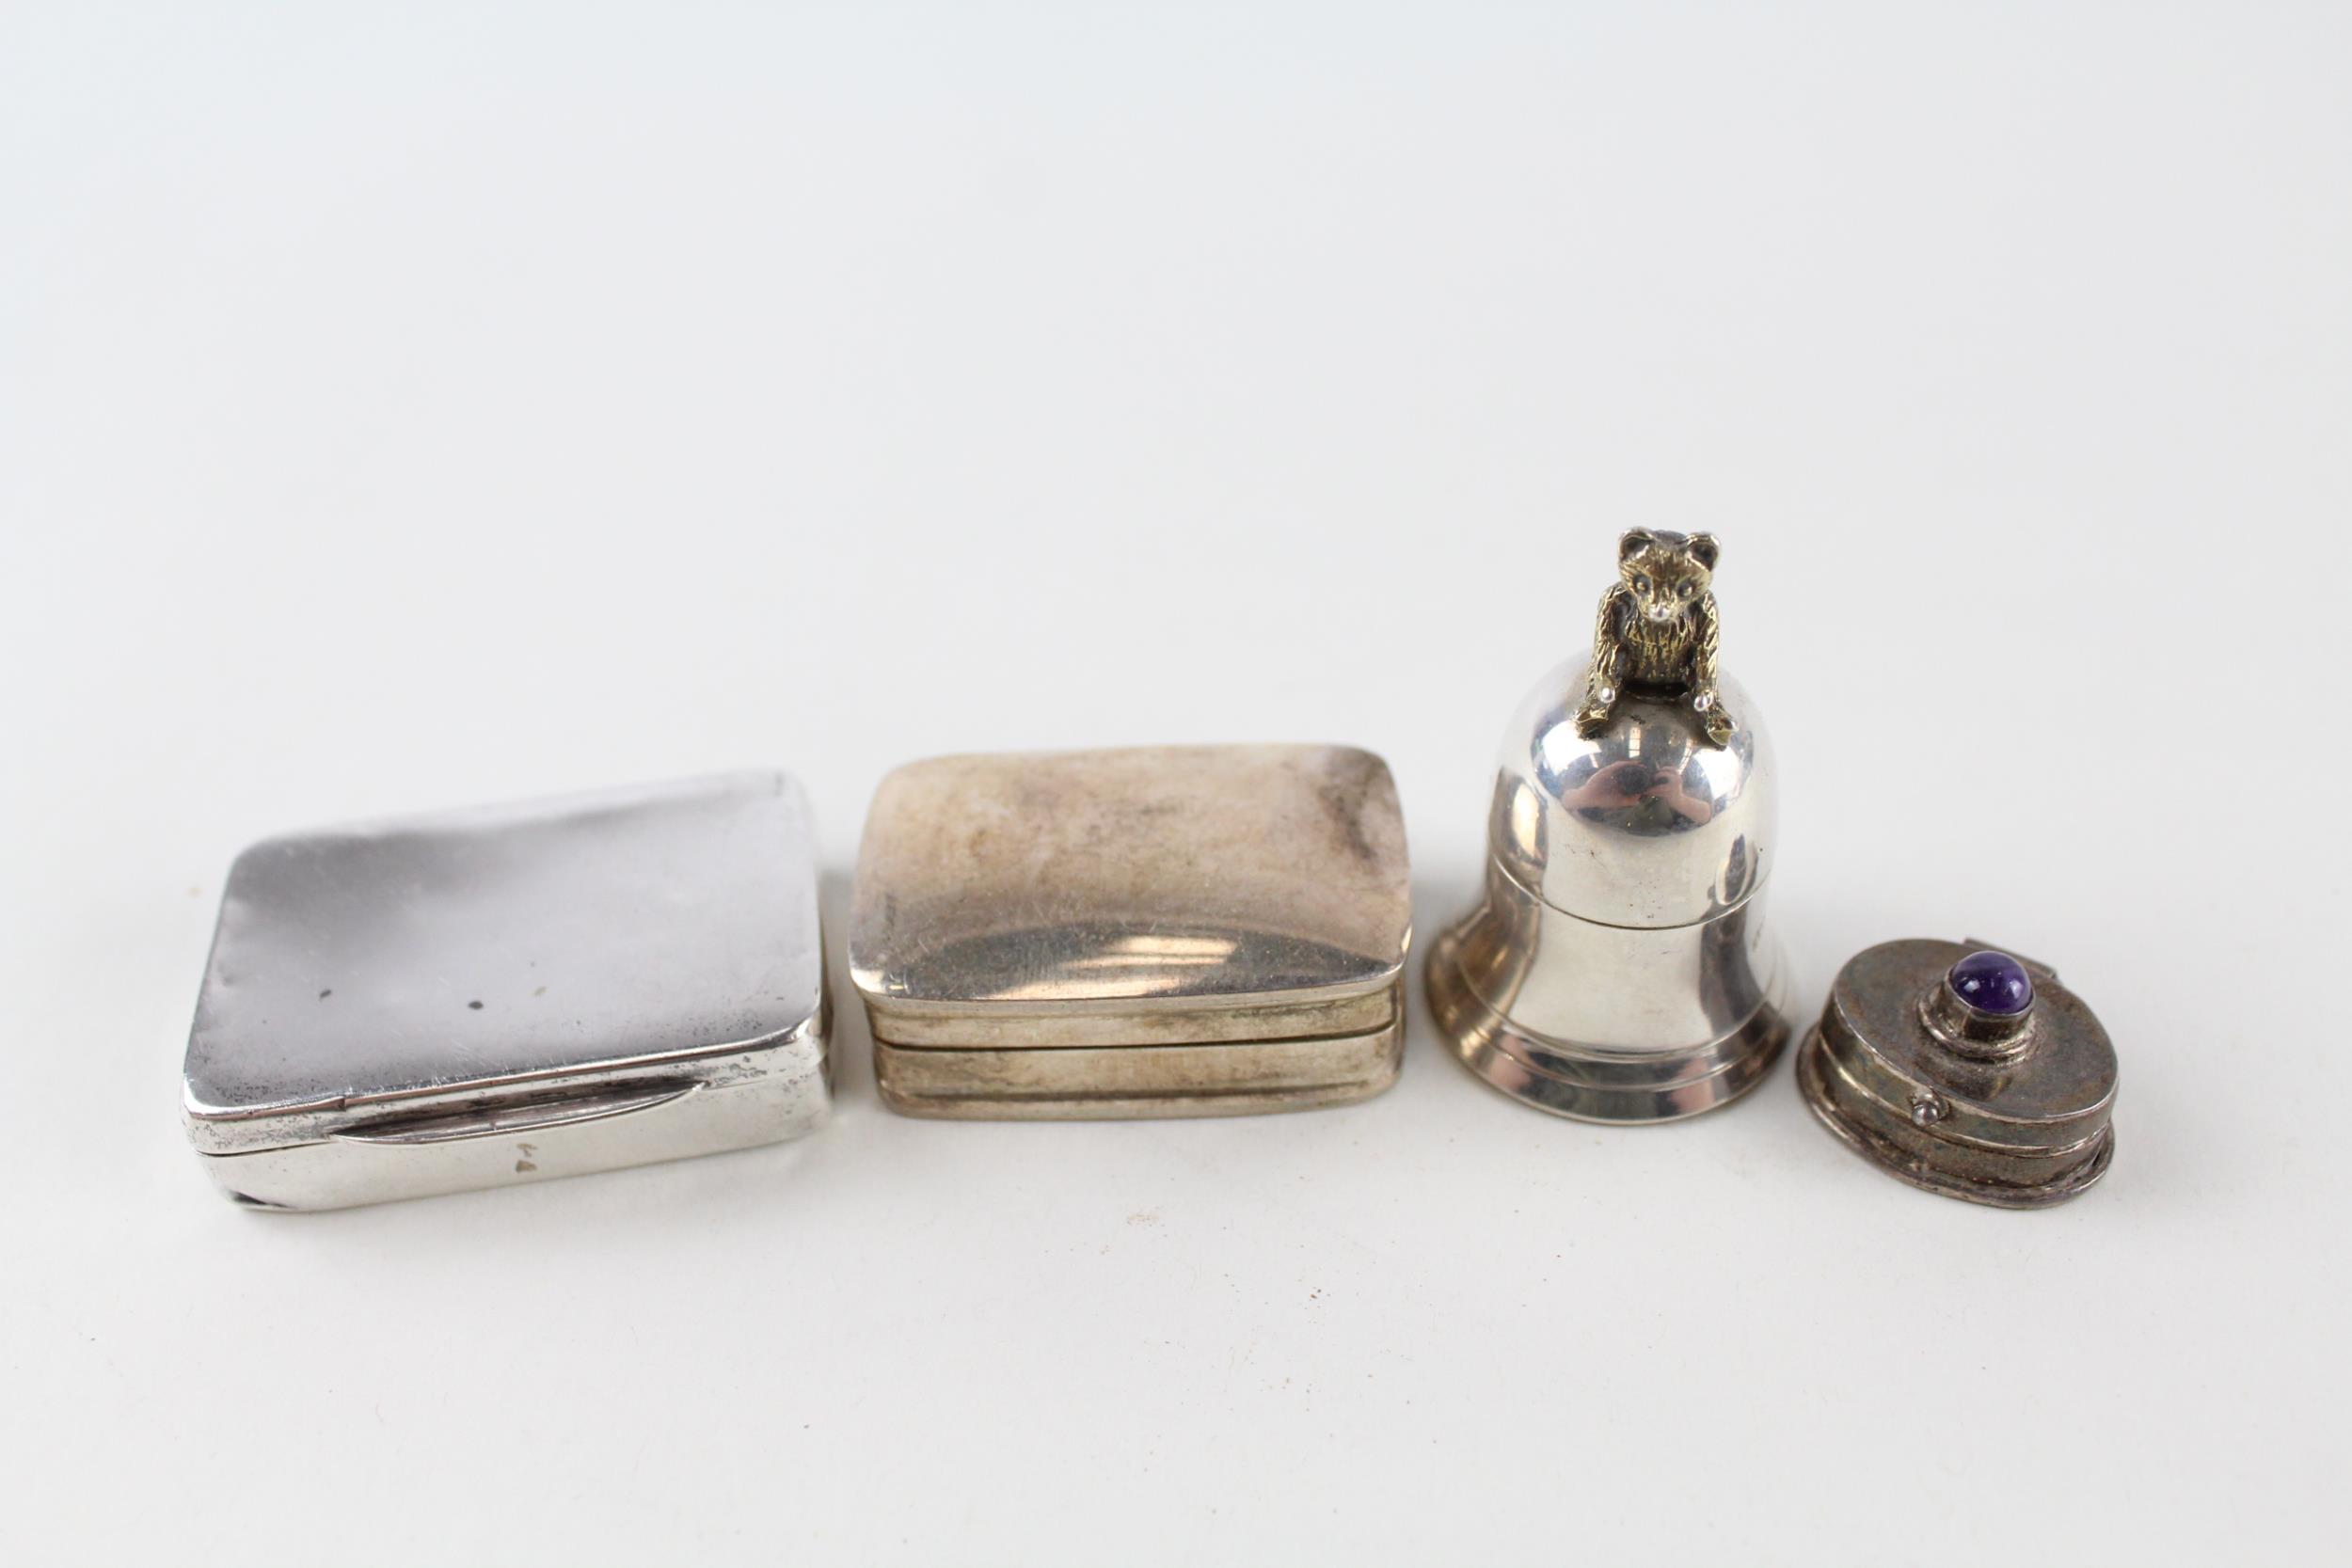 4 x Antique / Vintage Hallmarked .925 Sterling Silver Pill / Trinket Boxes (52g) - In antique /